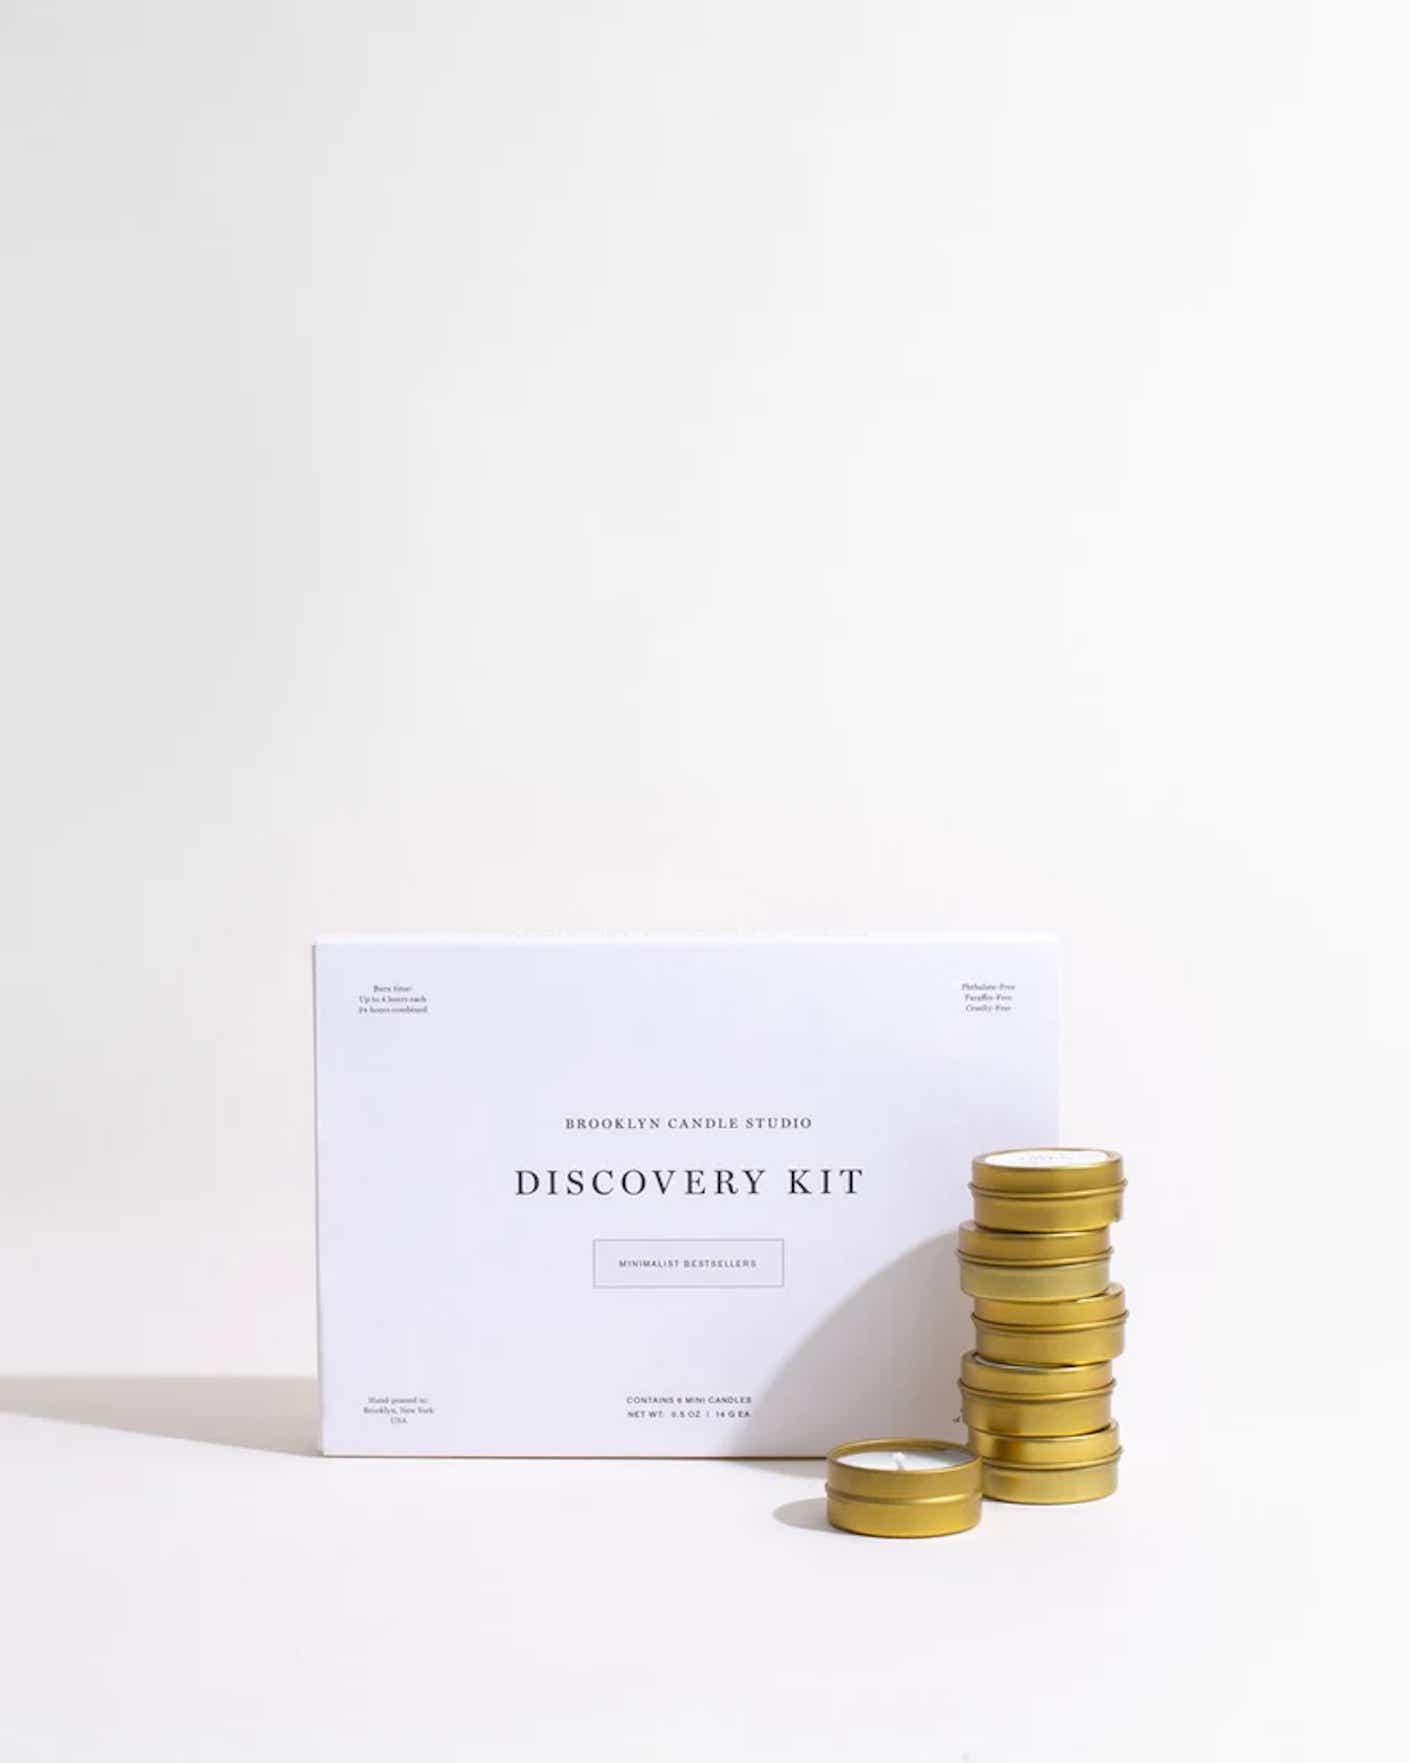 A stack of white, scented tea candles in bronze colored metallic containers sits in front of a minimalistic box.